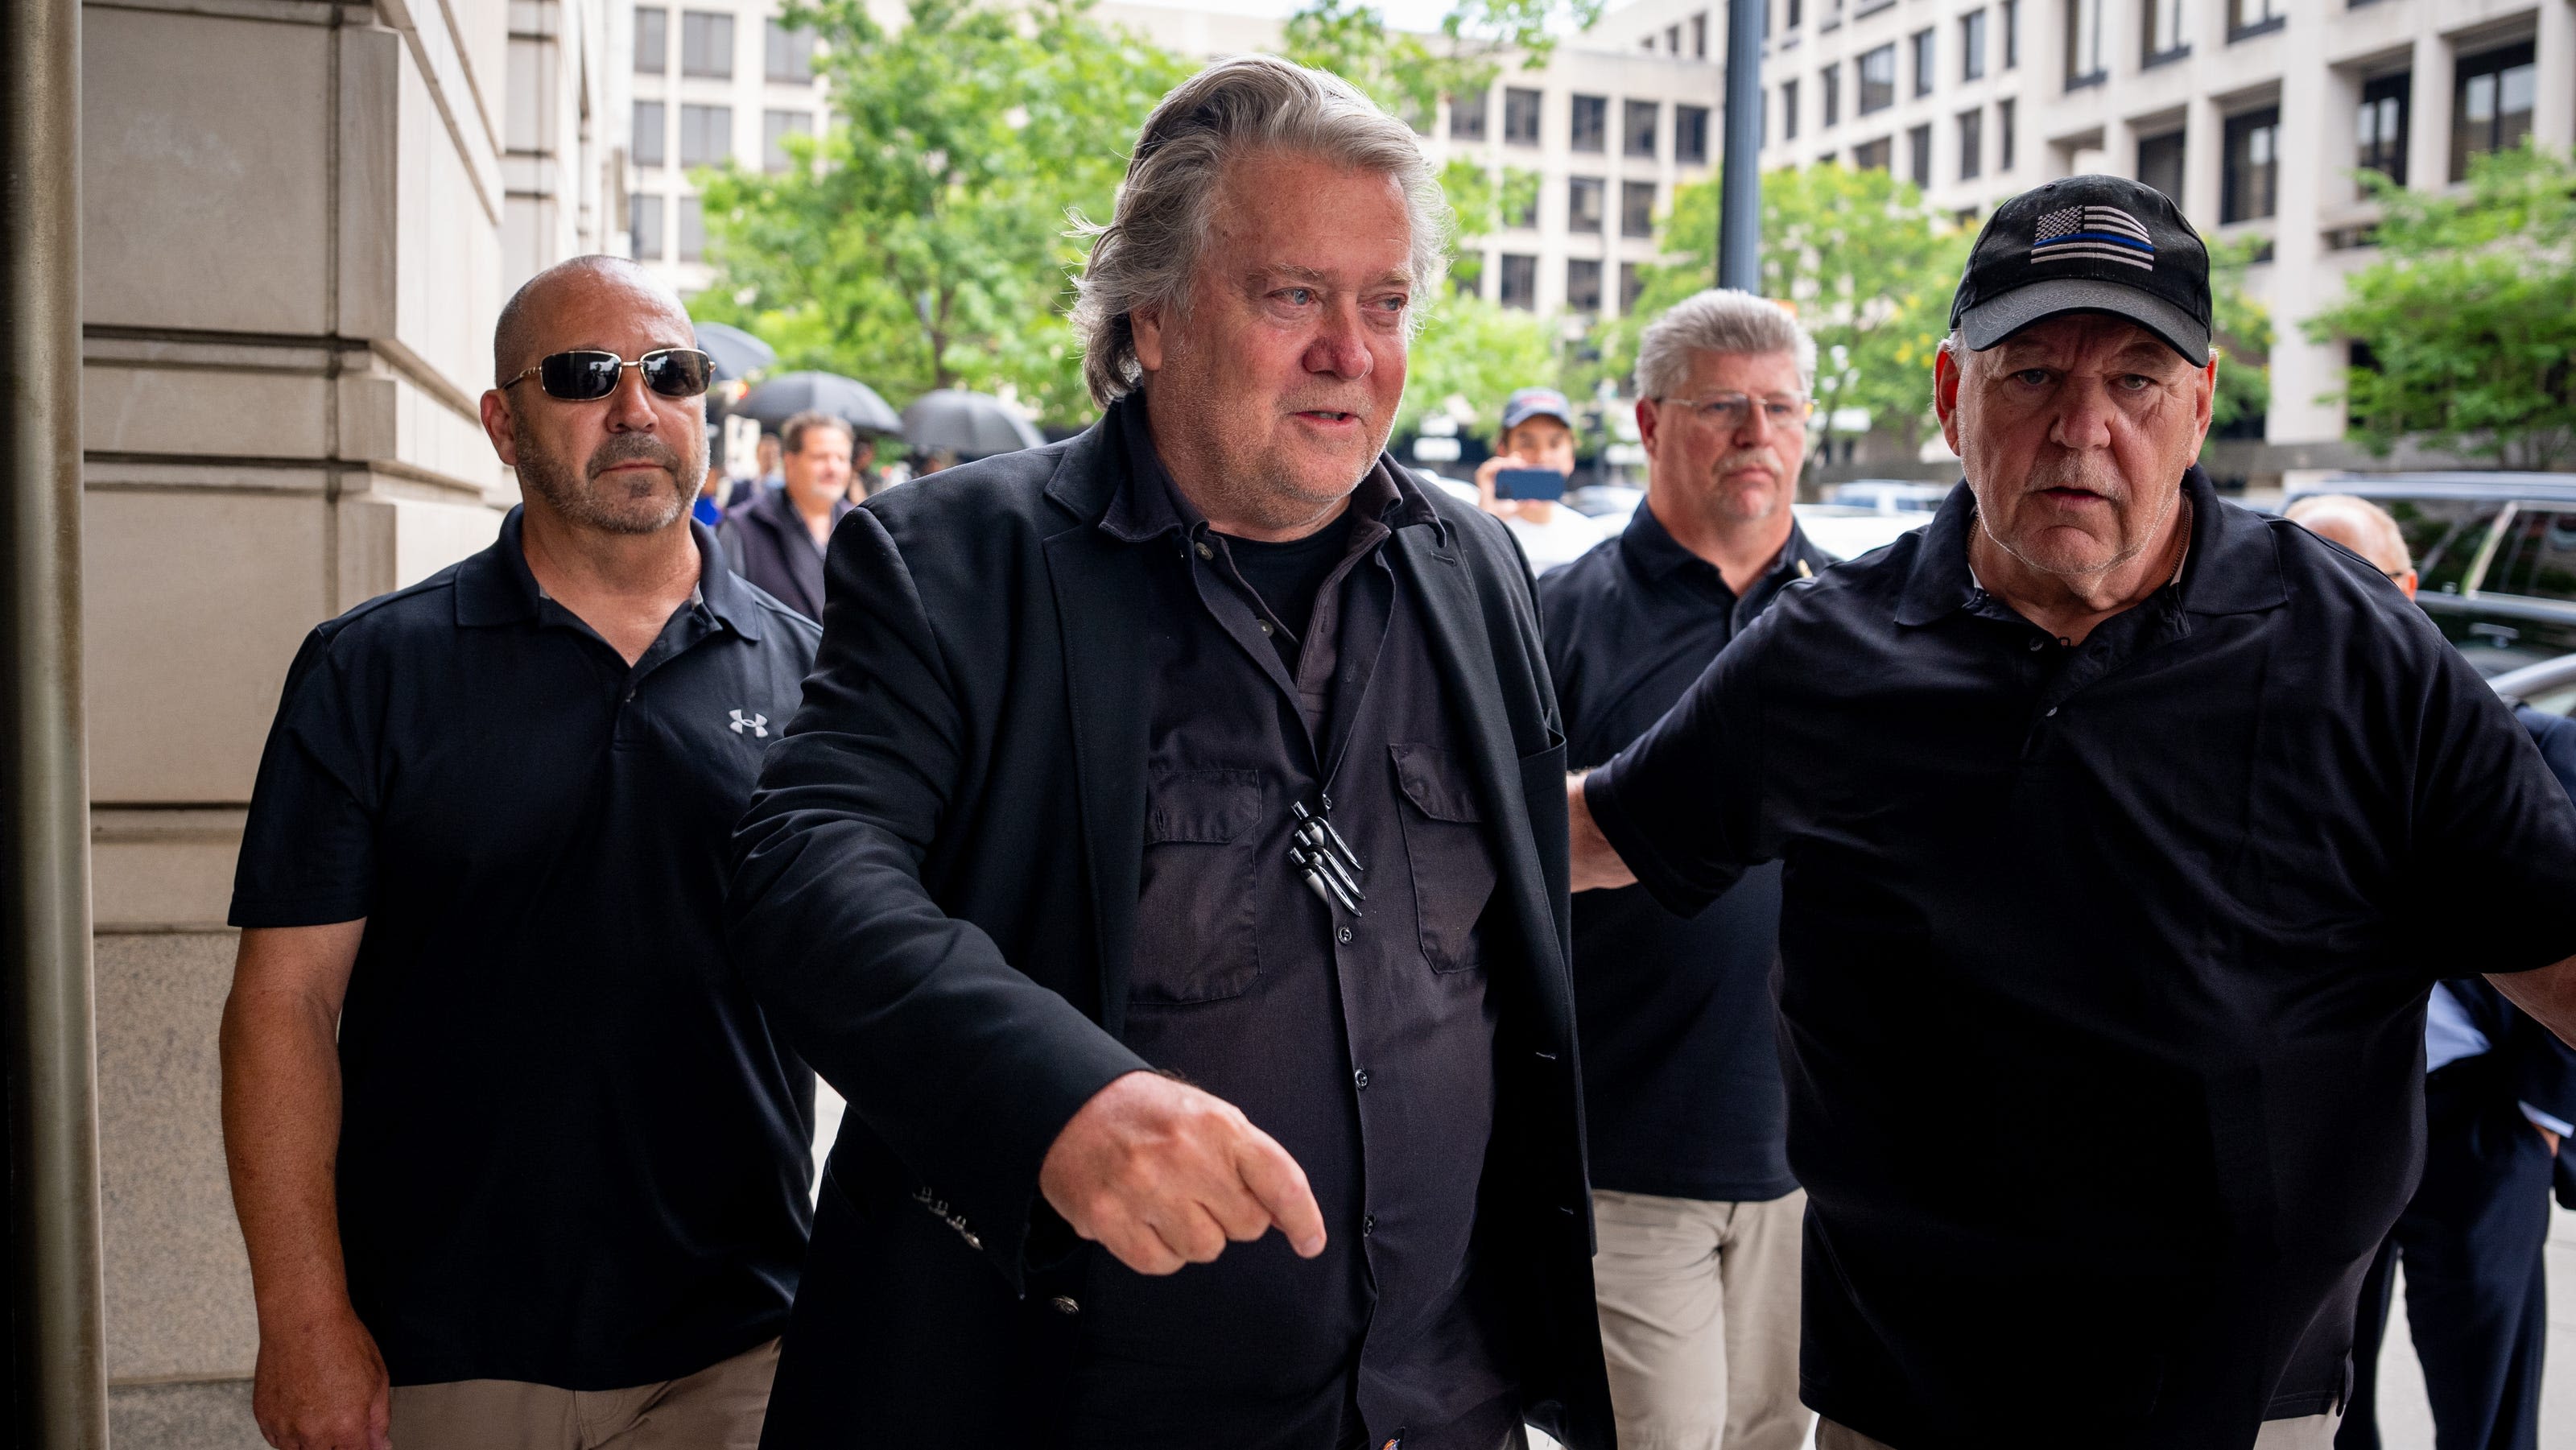 Judge orders Donald Trump's strategist Steve Bannon to jail after losing contempt appeal